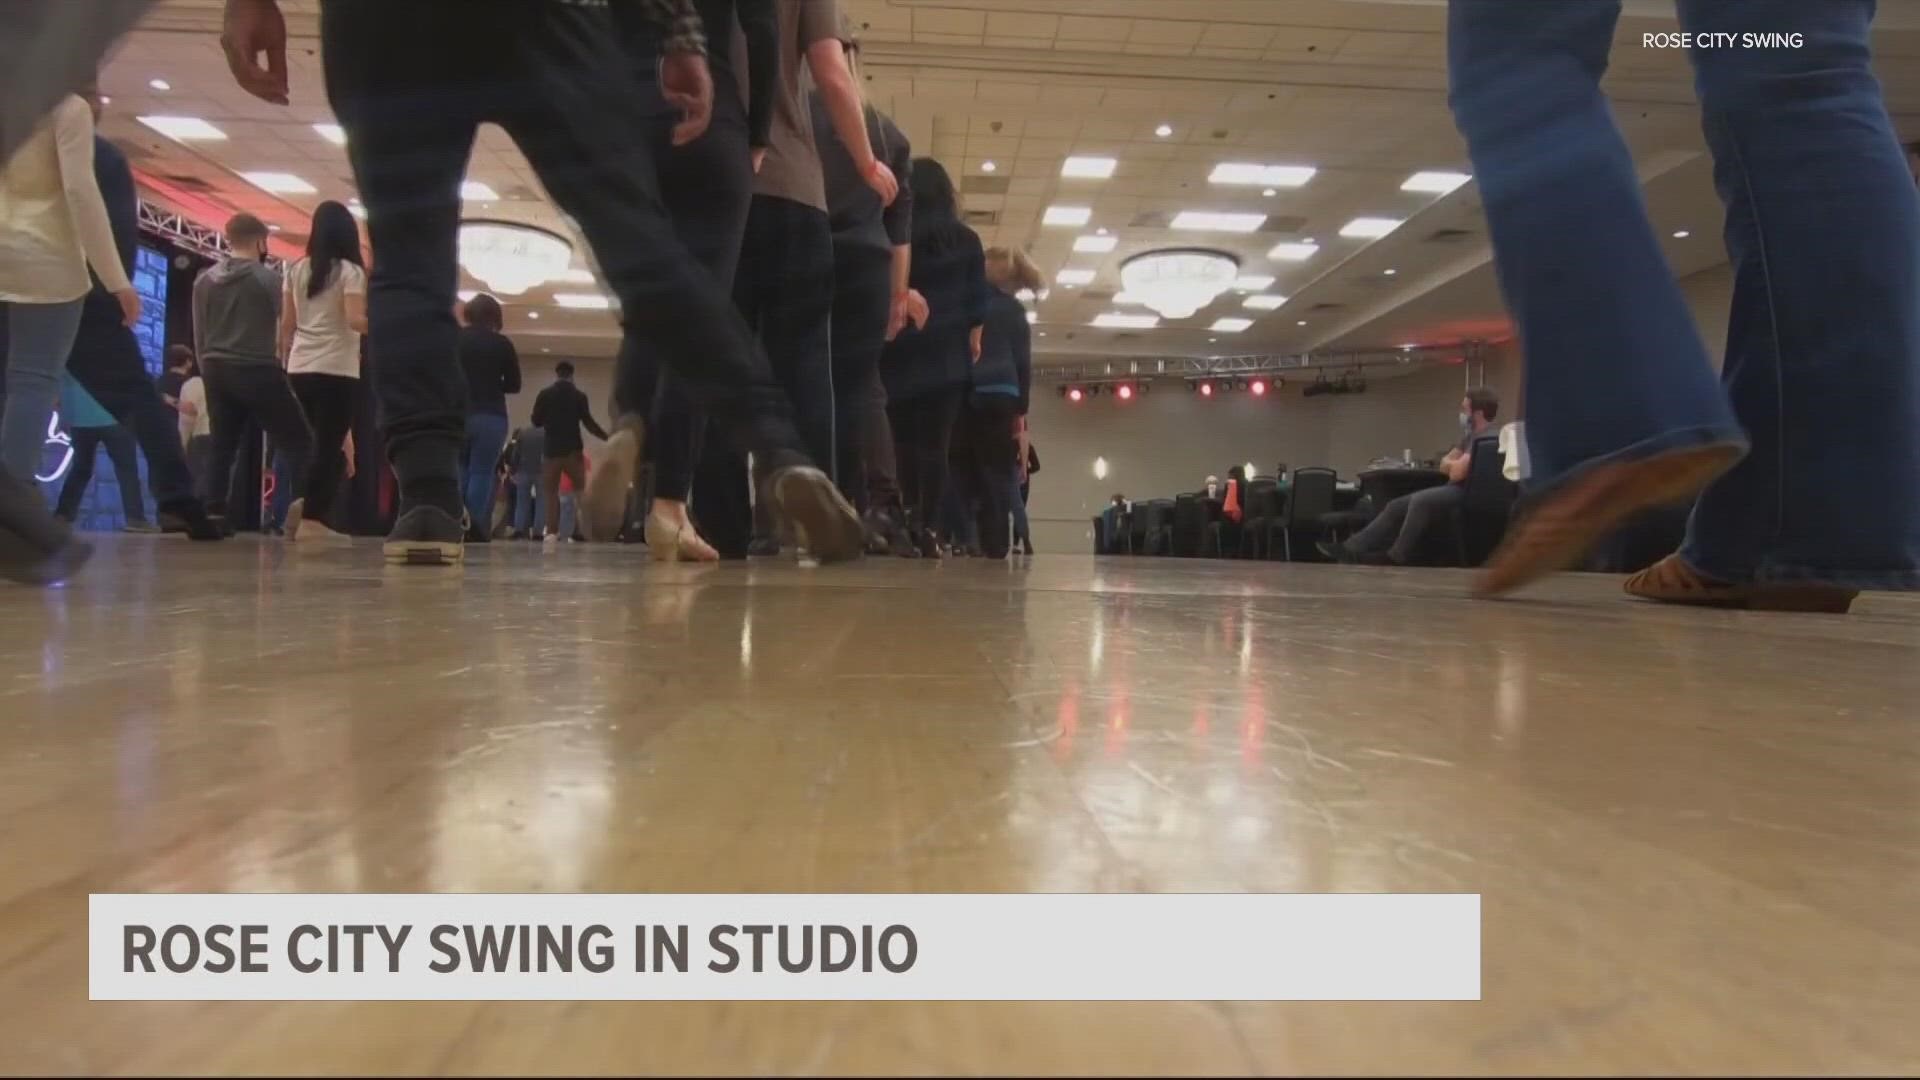 The Rose City Swing Event attracts hundreds of people from all over the world. It's happening again this year! Rose City Swing was in KGW studios Wednesday!